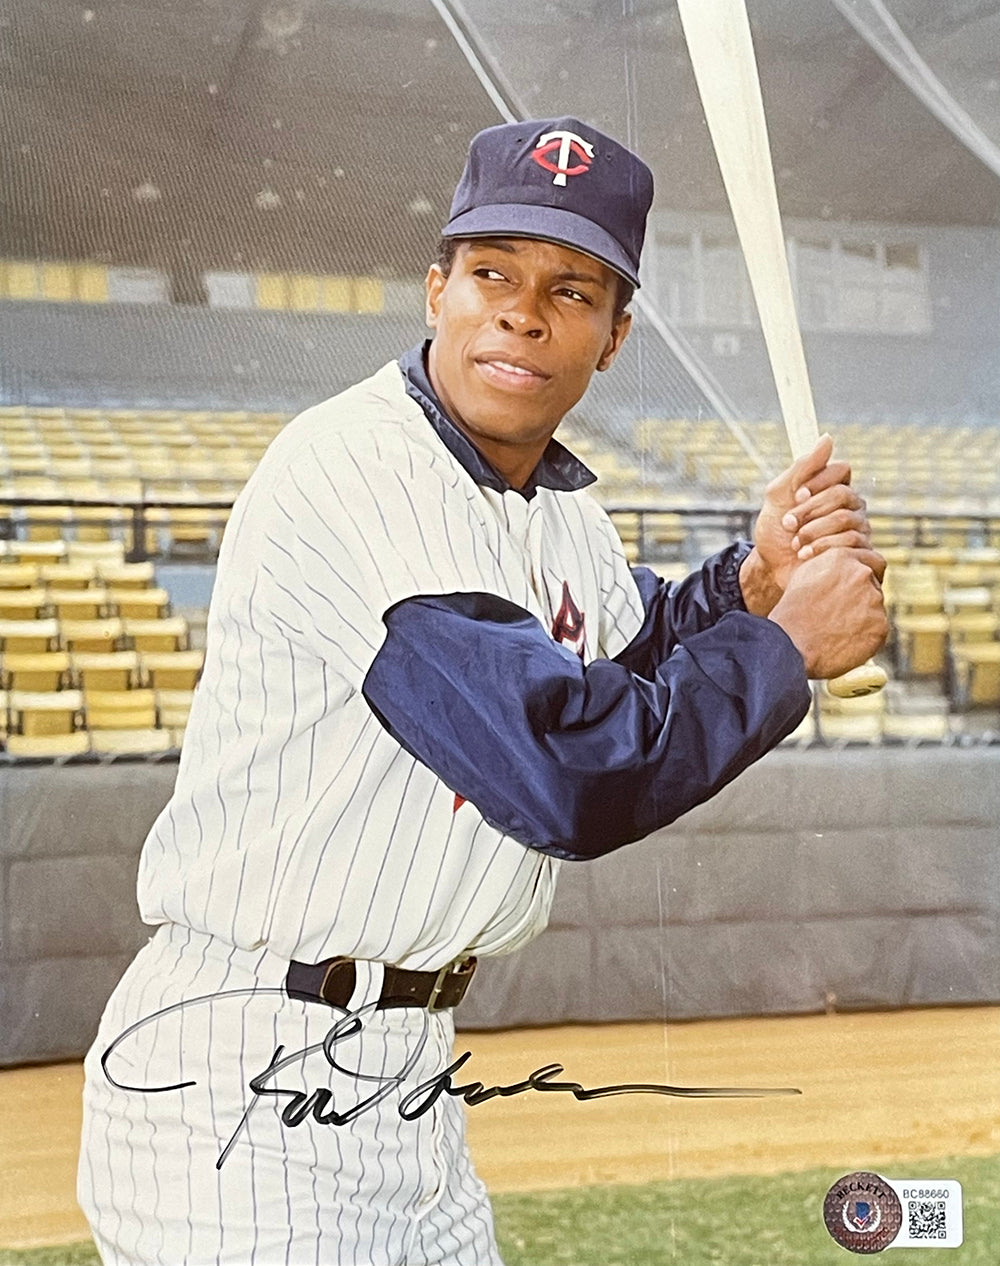 Minnesota Twins - On today's date in 1987, we retired Rod Carew's